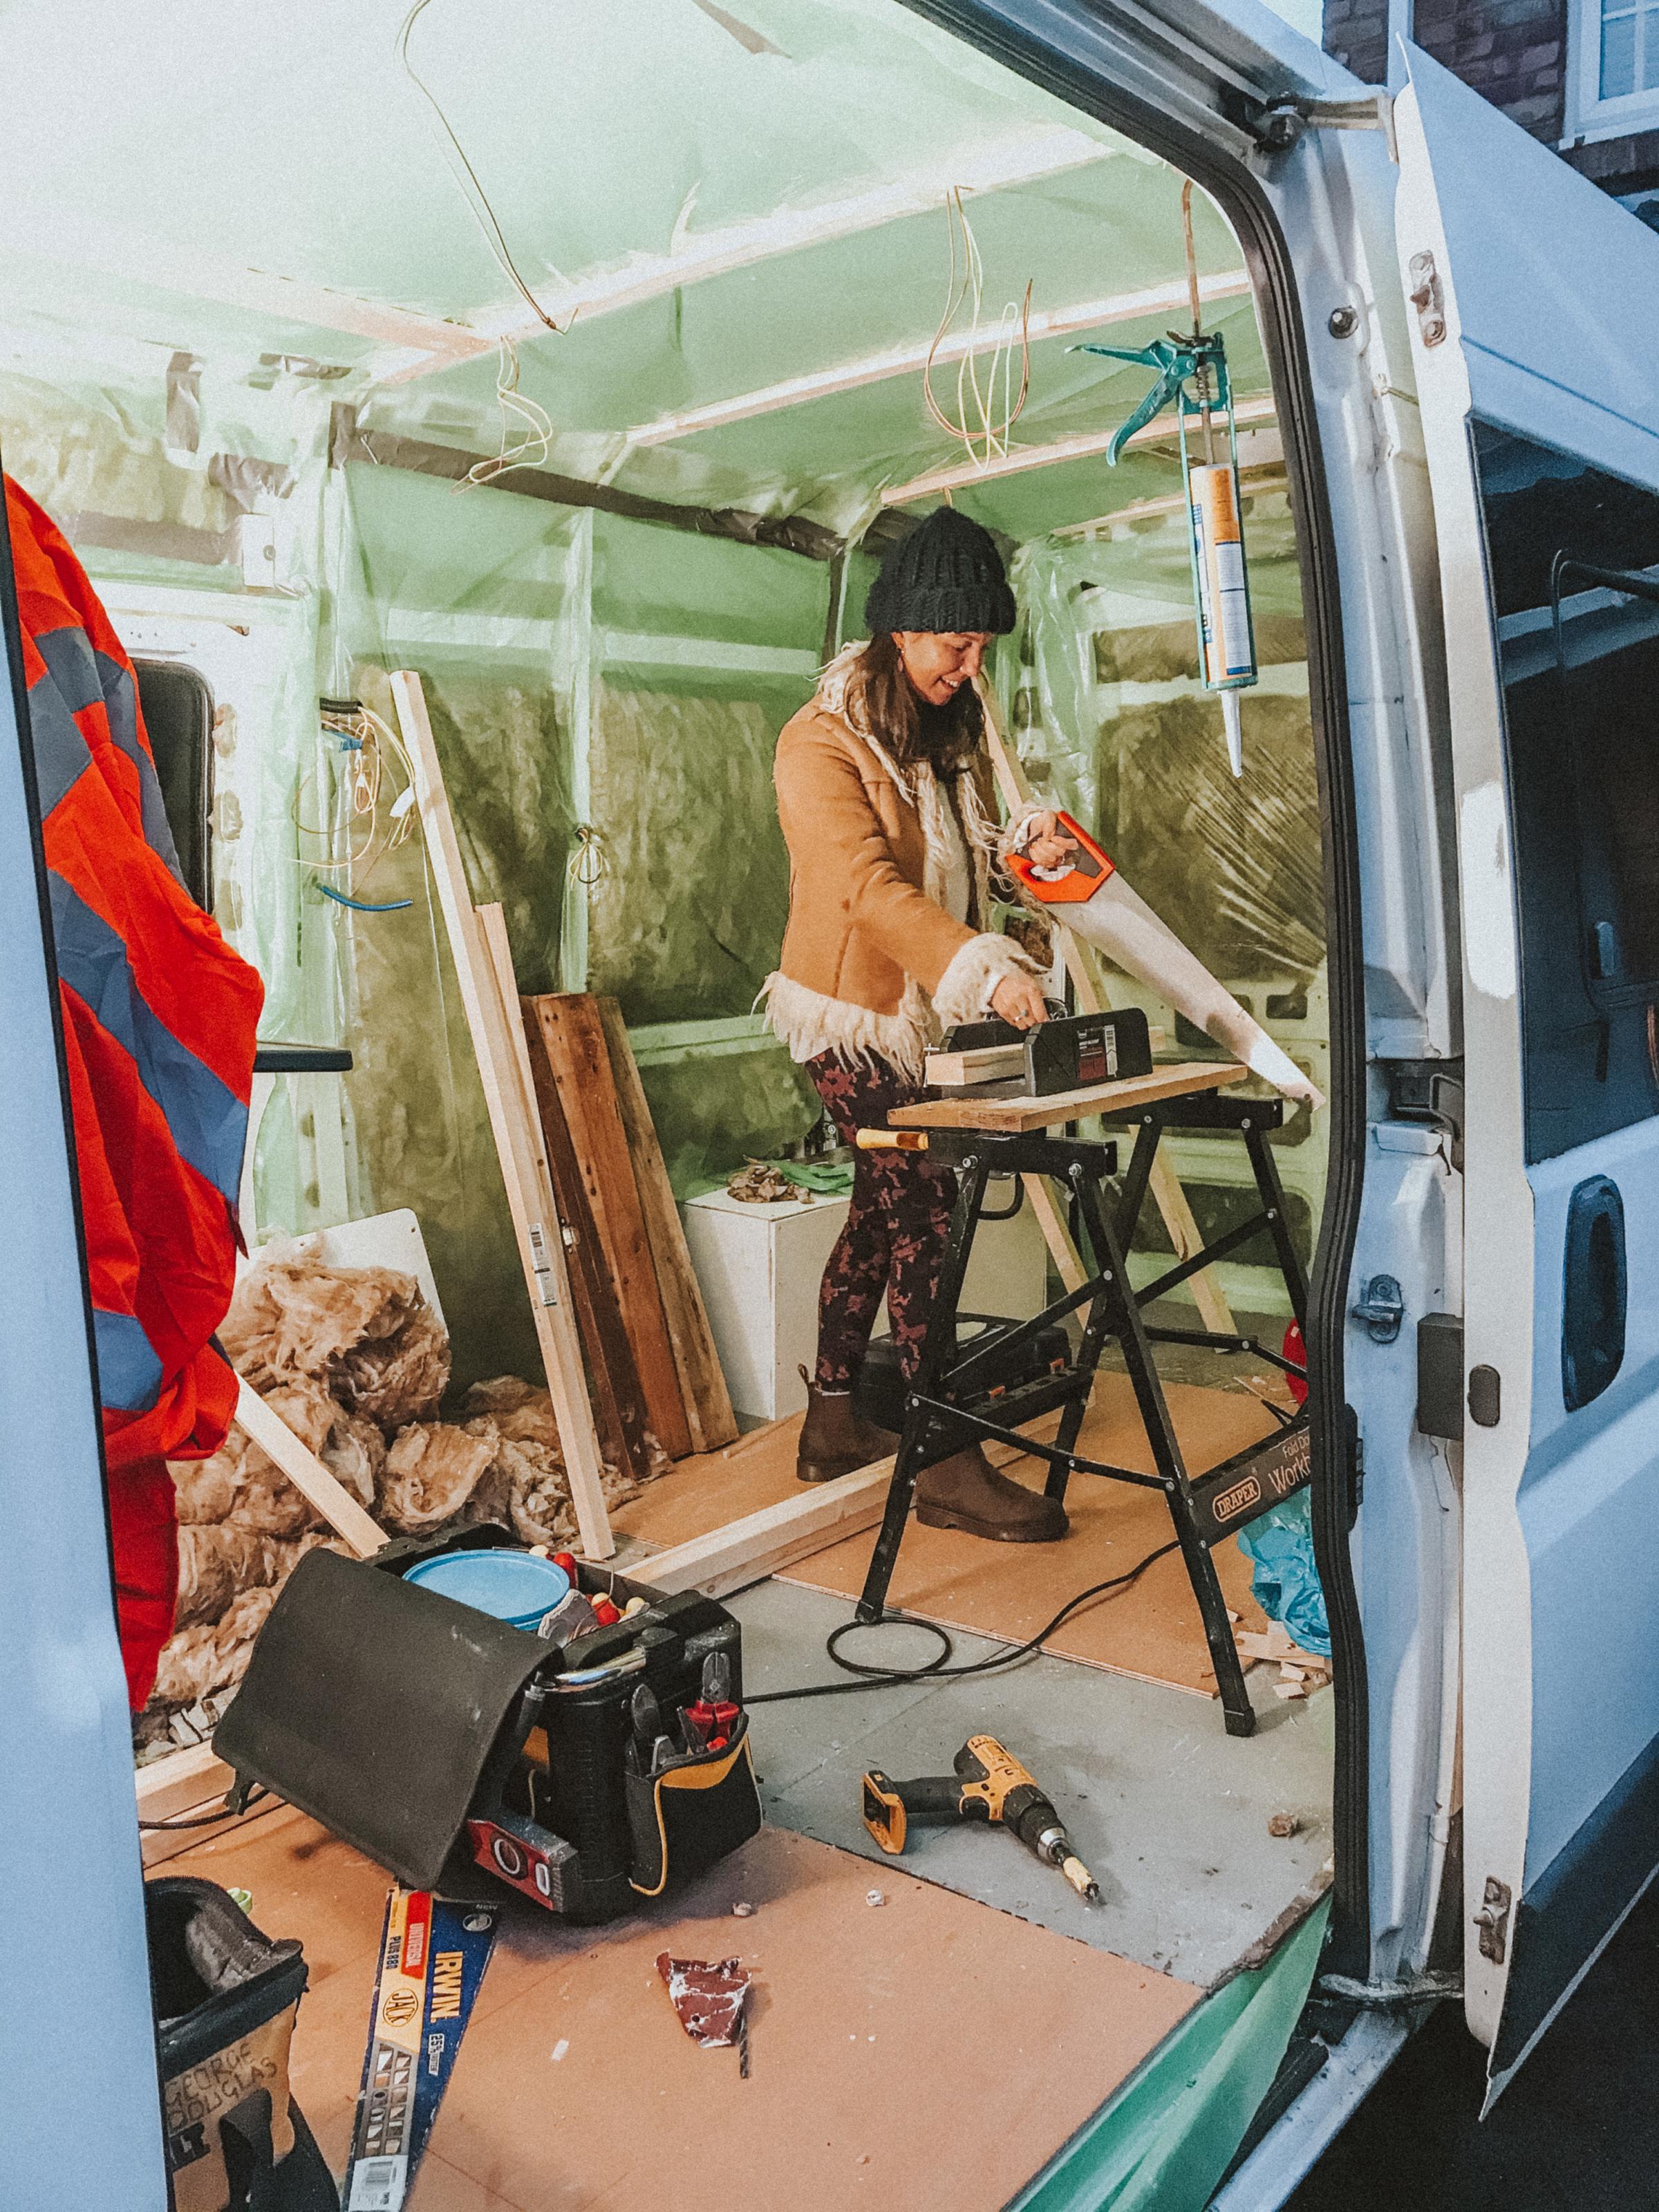 The couple have been transforming the van 